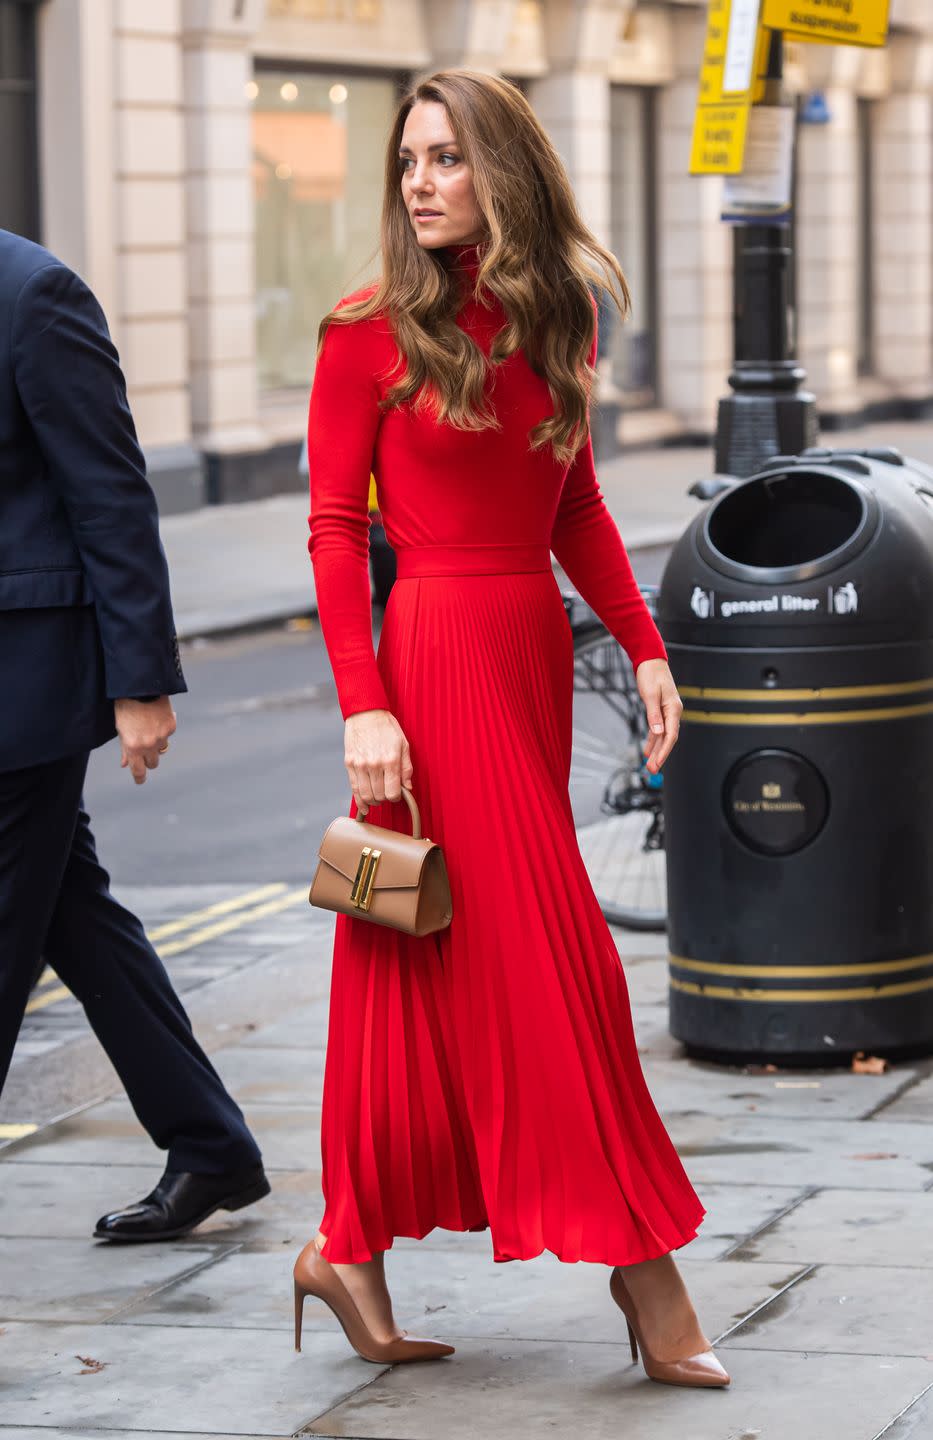 Kate Middleton Stuns in a Bright-Red Turtleneck and Matching Midi Skirt